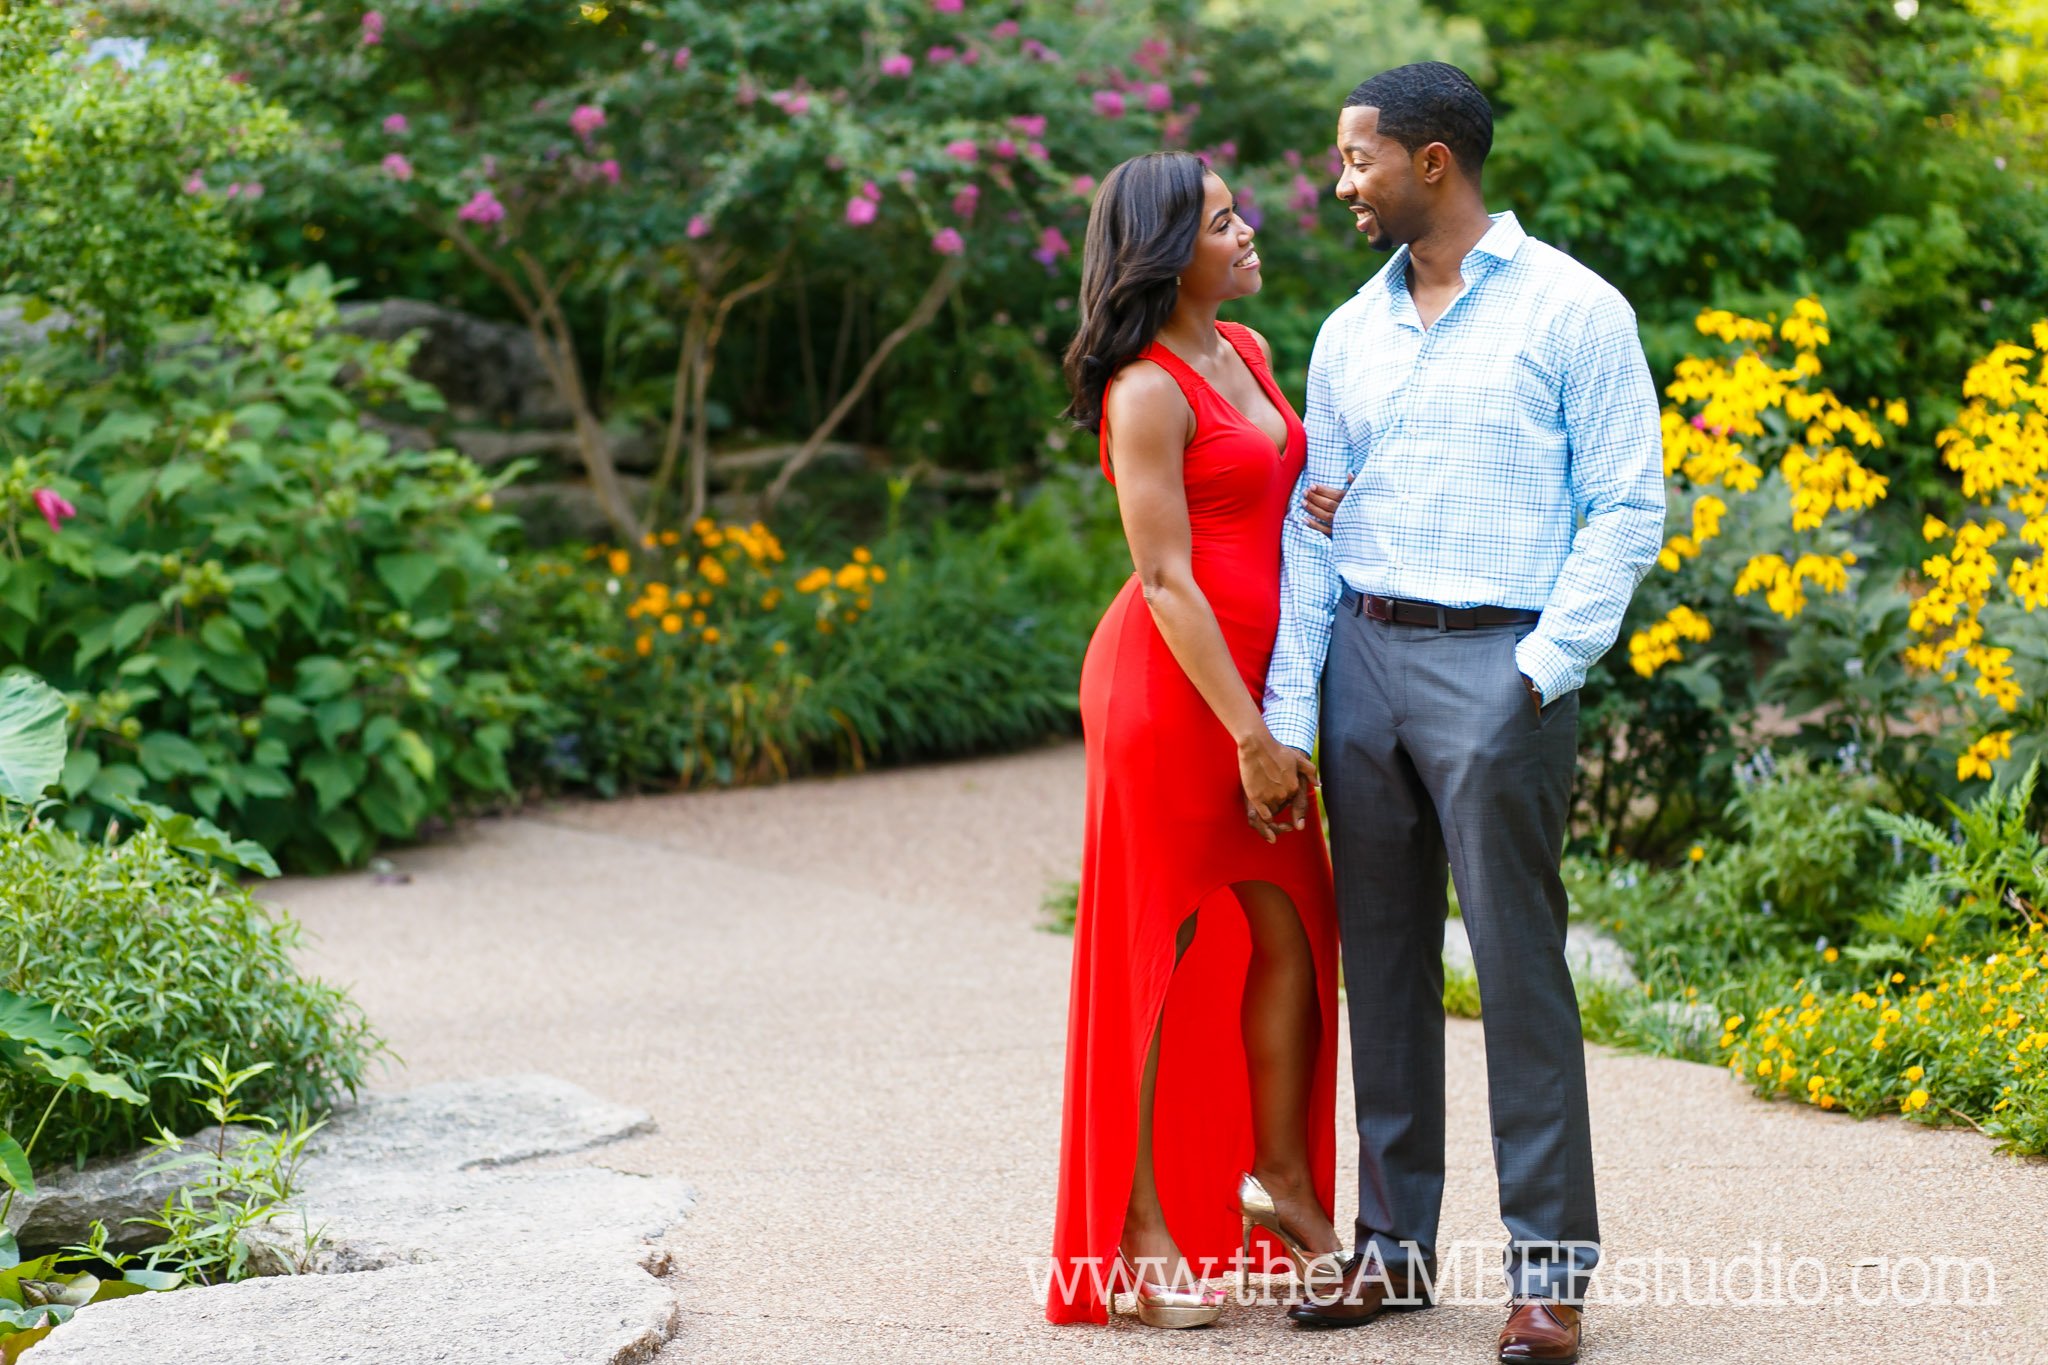 black-wedding-photographer-dallas-texas-engagement-photos-amber-knowles-studio-fort-worth-botanical-gardens-red-dress-suit-african-american-couple-cc0003